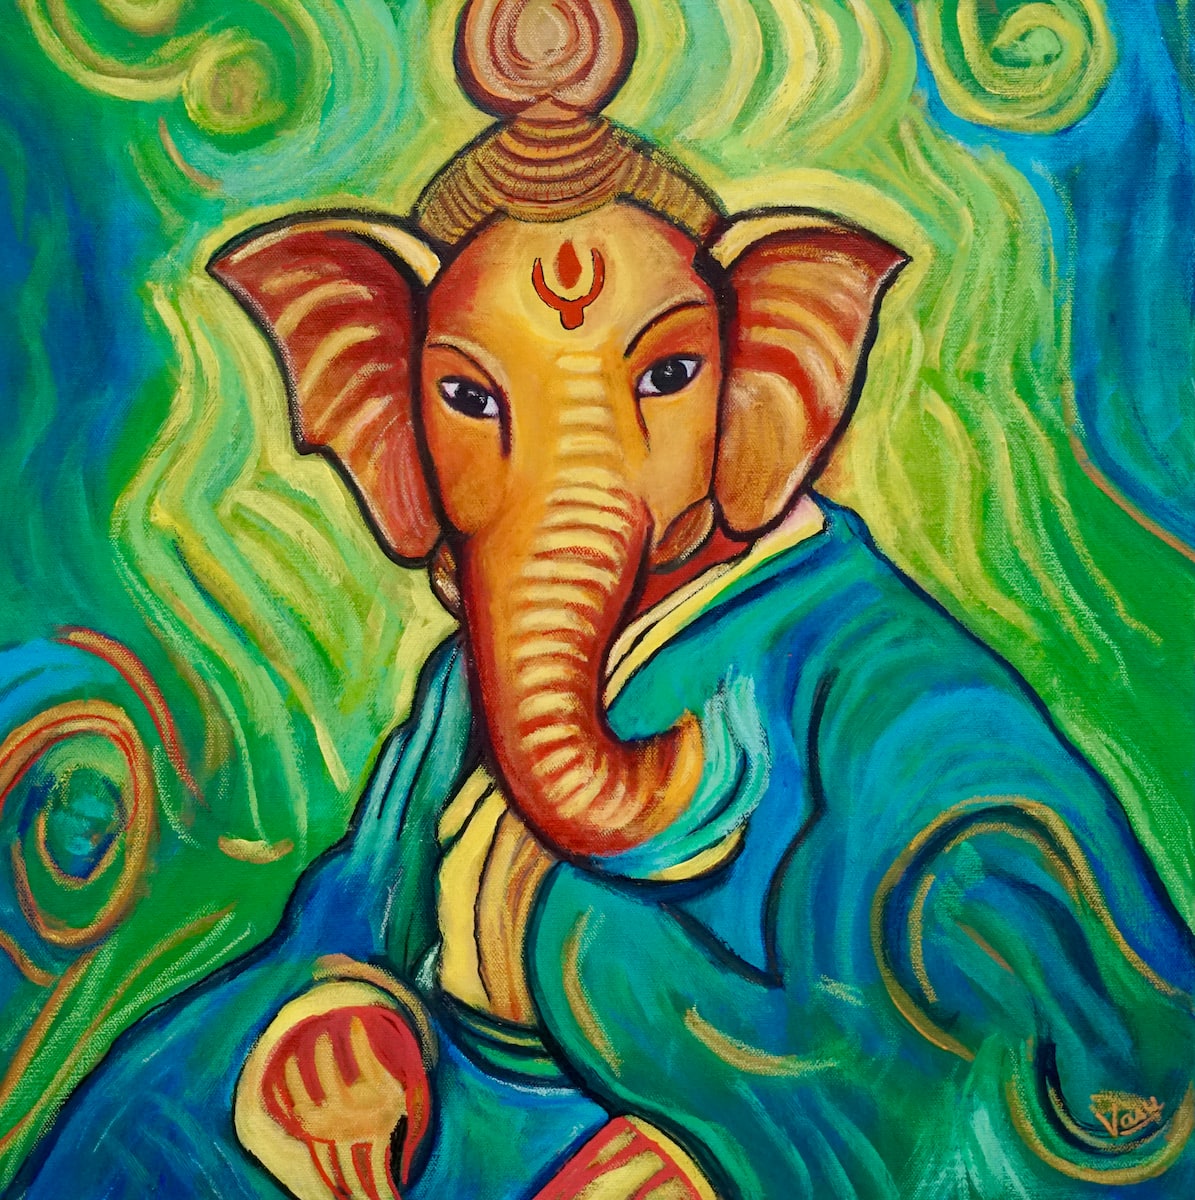 Ganesha - Van Gogh perspective by Vasu Tolia  Image: This painting of Ganesha is mage in the style of the great Abstractionist, Vincent Van Gogh with thick brush strokes in swirls, curves and with Ganesha sitting in a regal robe. A very distinctive portrait.